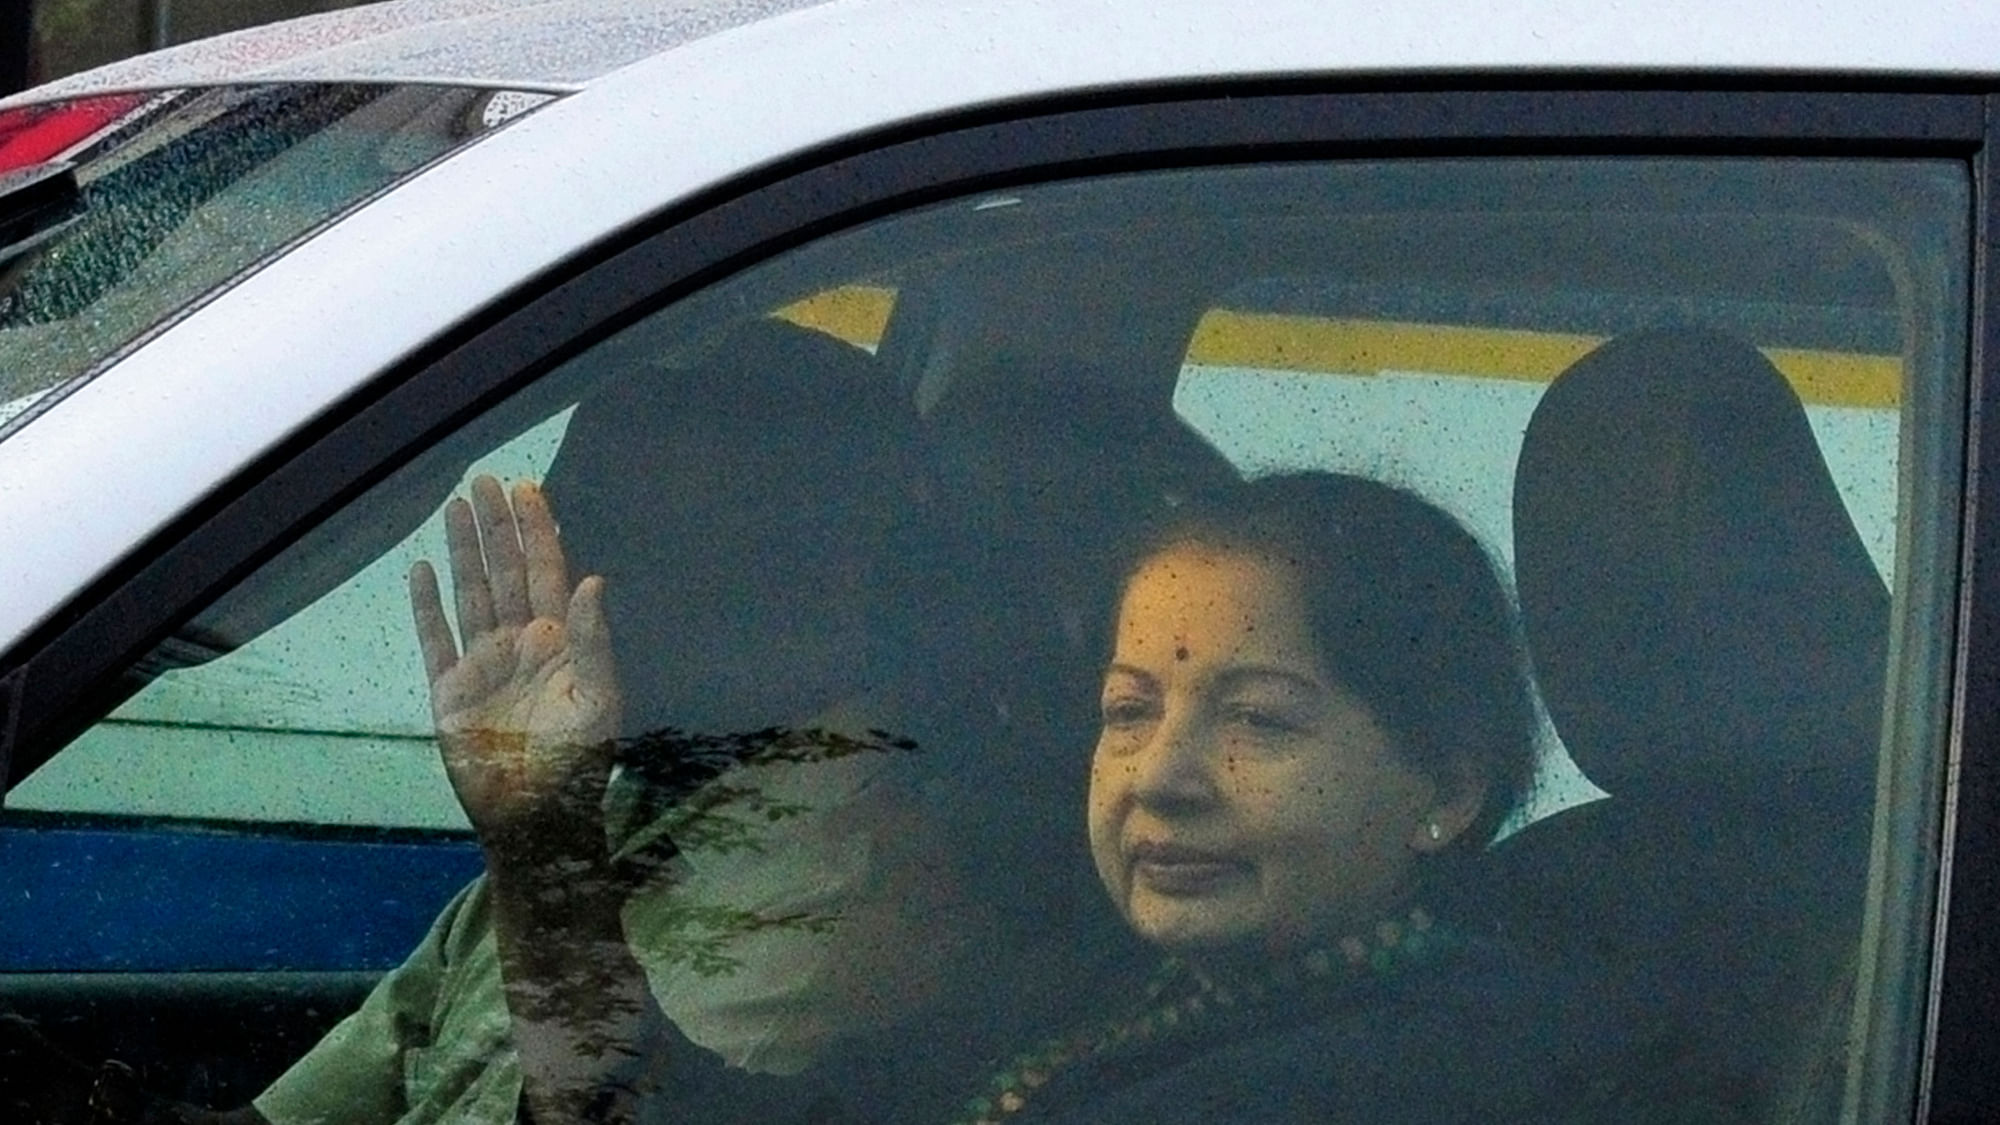 The 68-year-old Jayalalithaa was admitted to the hospital on 22 September for fever and dehydration. (Photo Credit: Reuters)